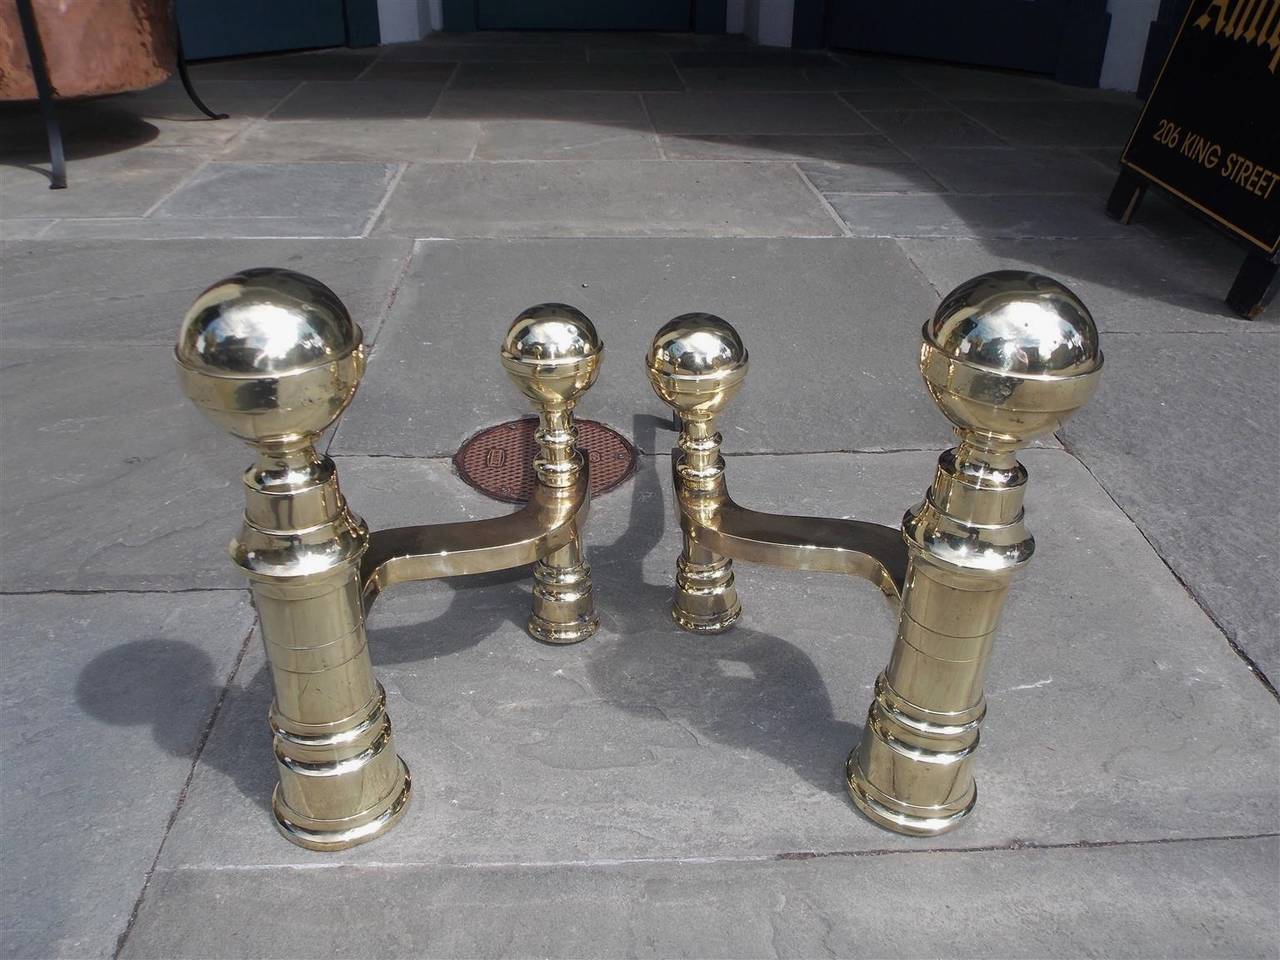 Pair of American brass ball top andirons with turned bulbous ring plinths, matching log stops, and original wrought iron dog legs, Early 19th century.